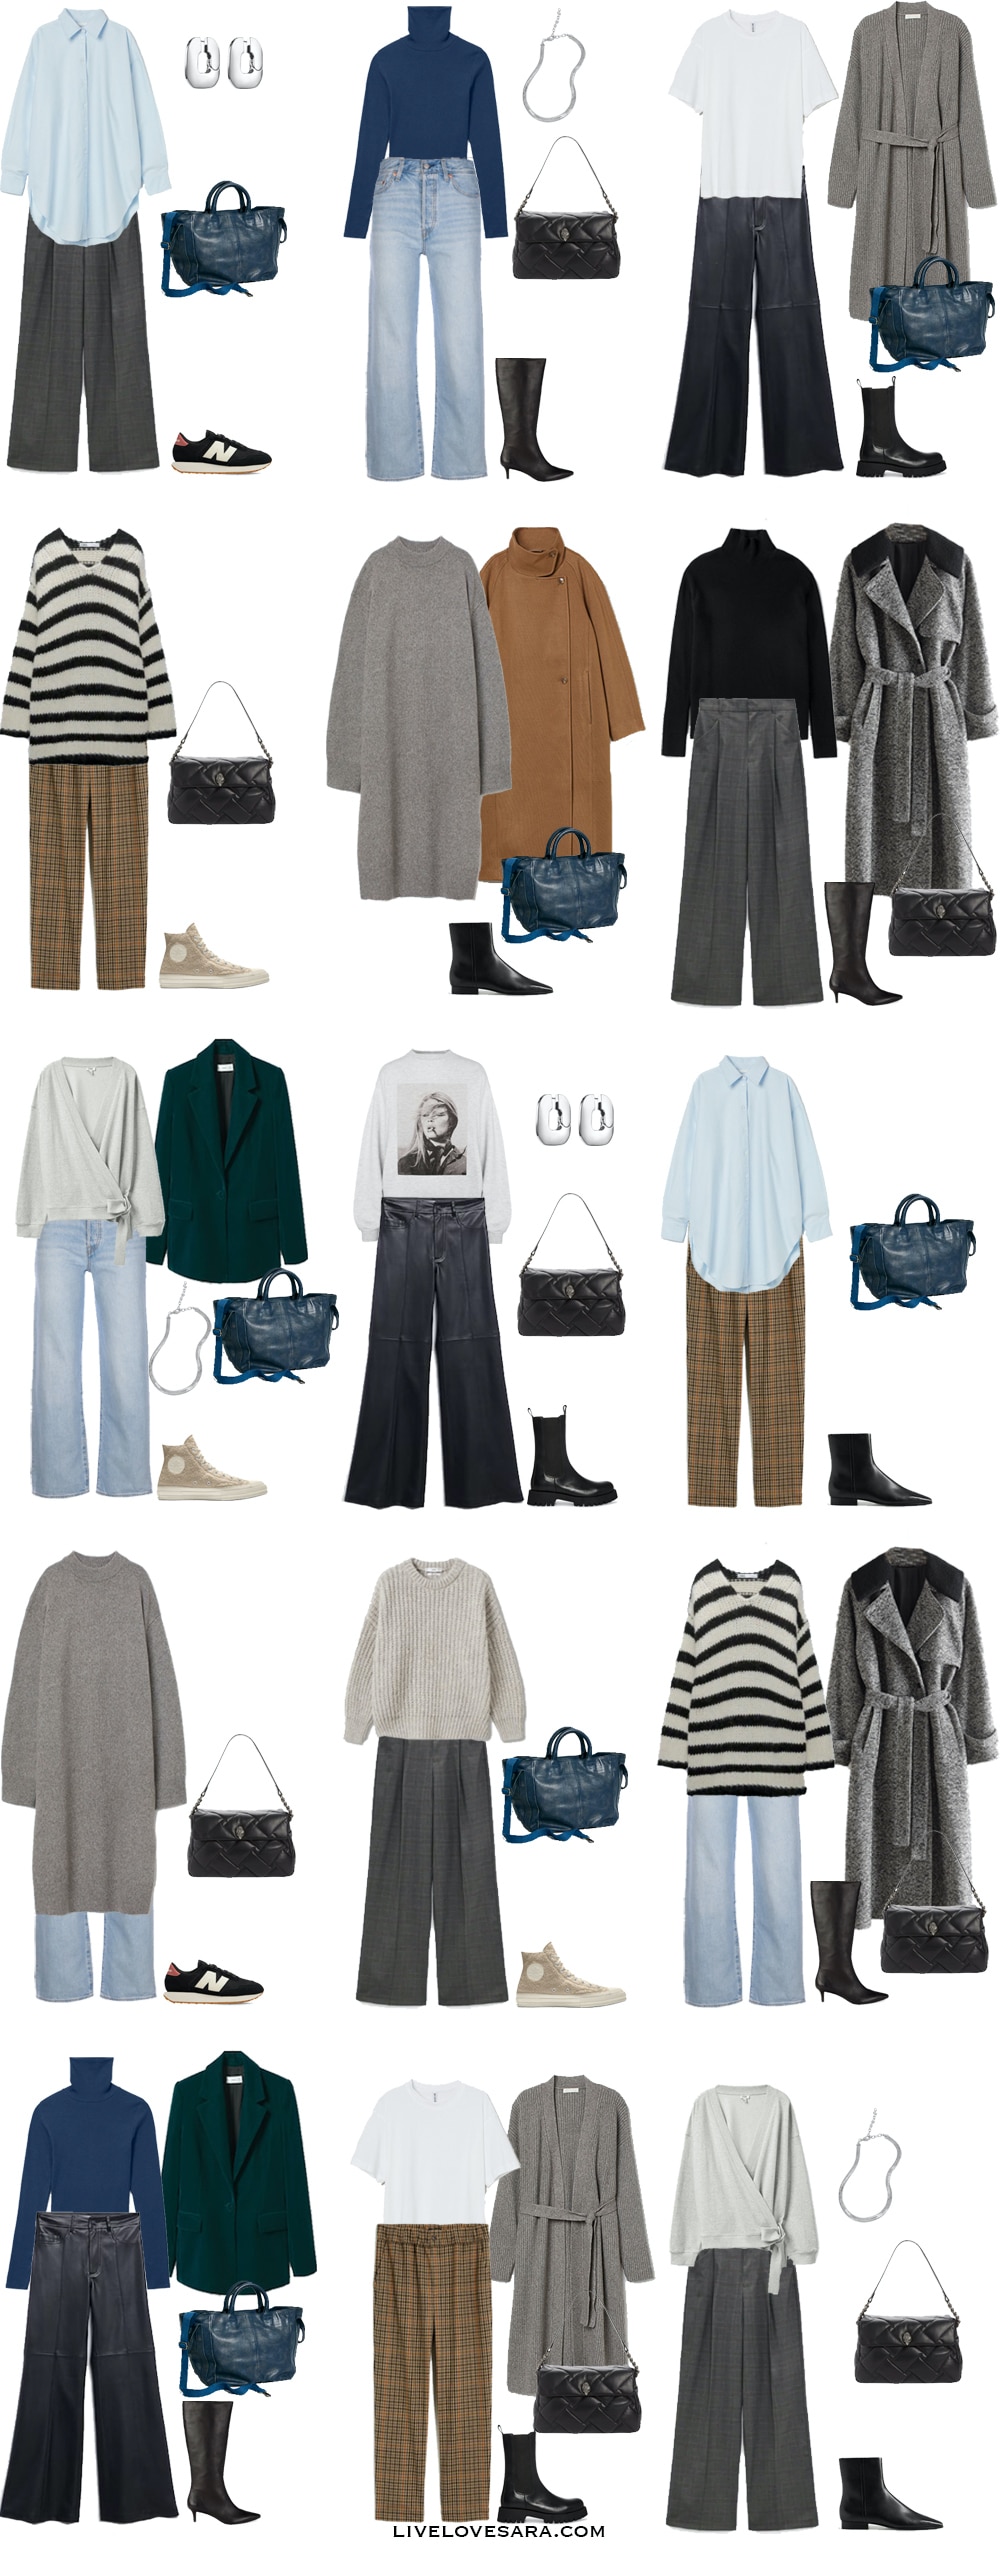 A white background with outfits 16-30 built from the winter capsule wardrobe.